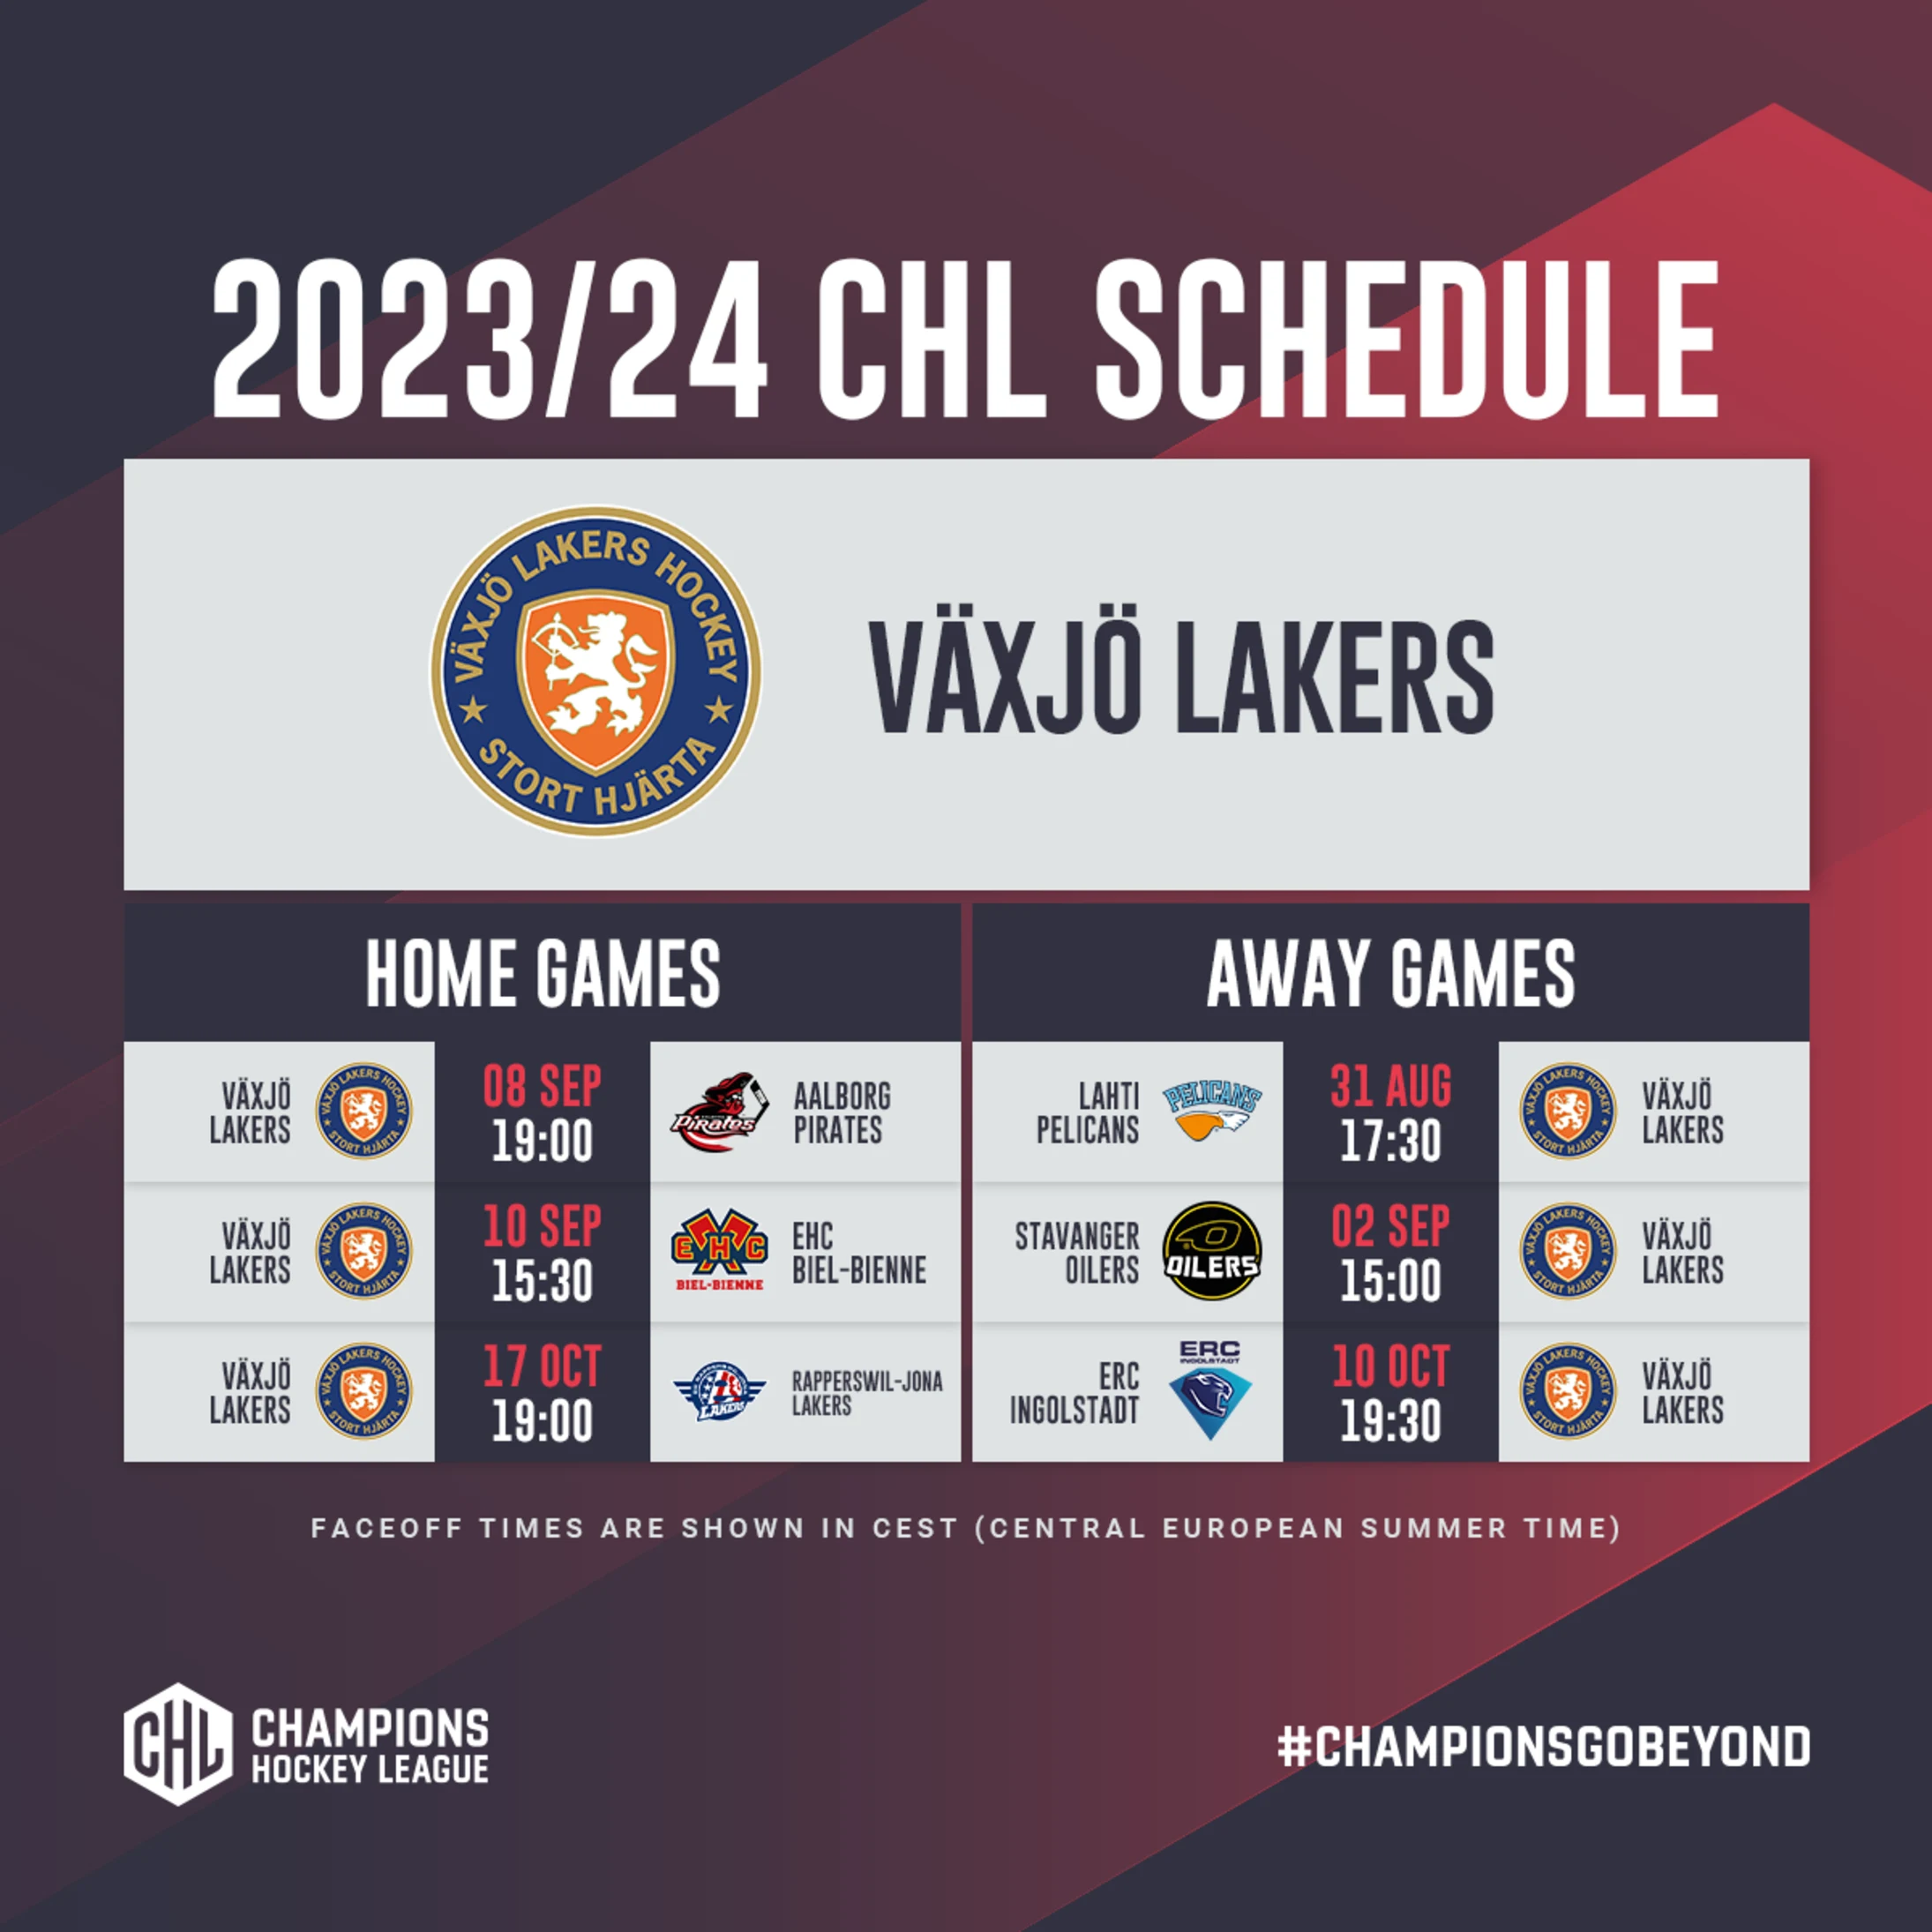 Schedule for 2023/24 is Official!